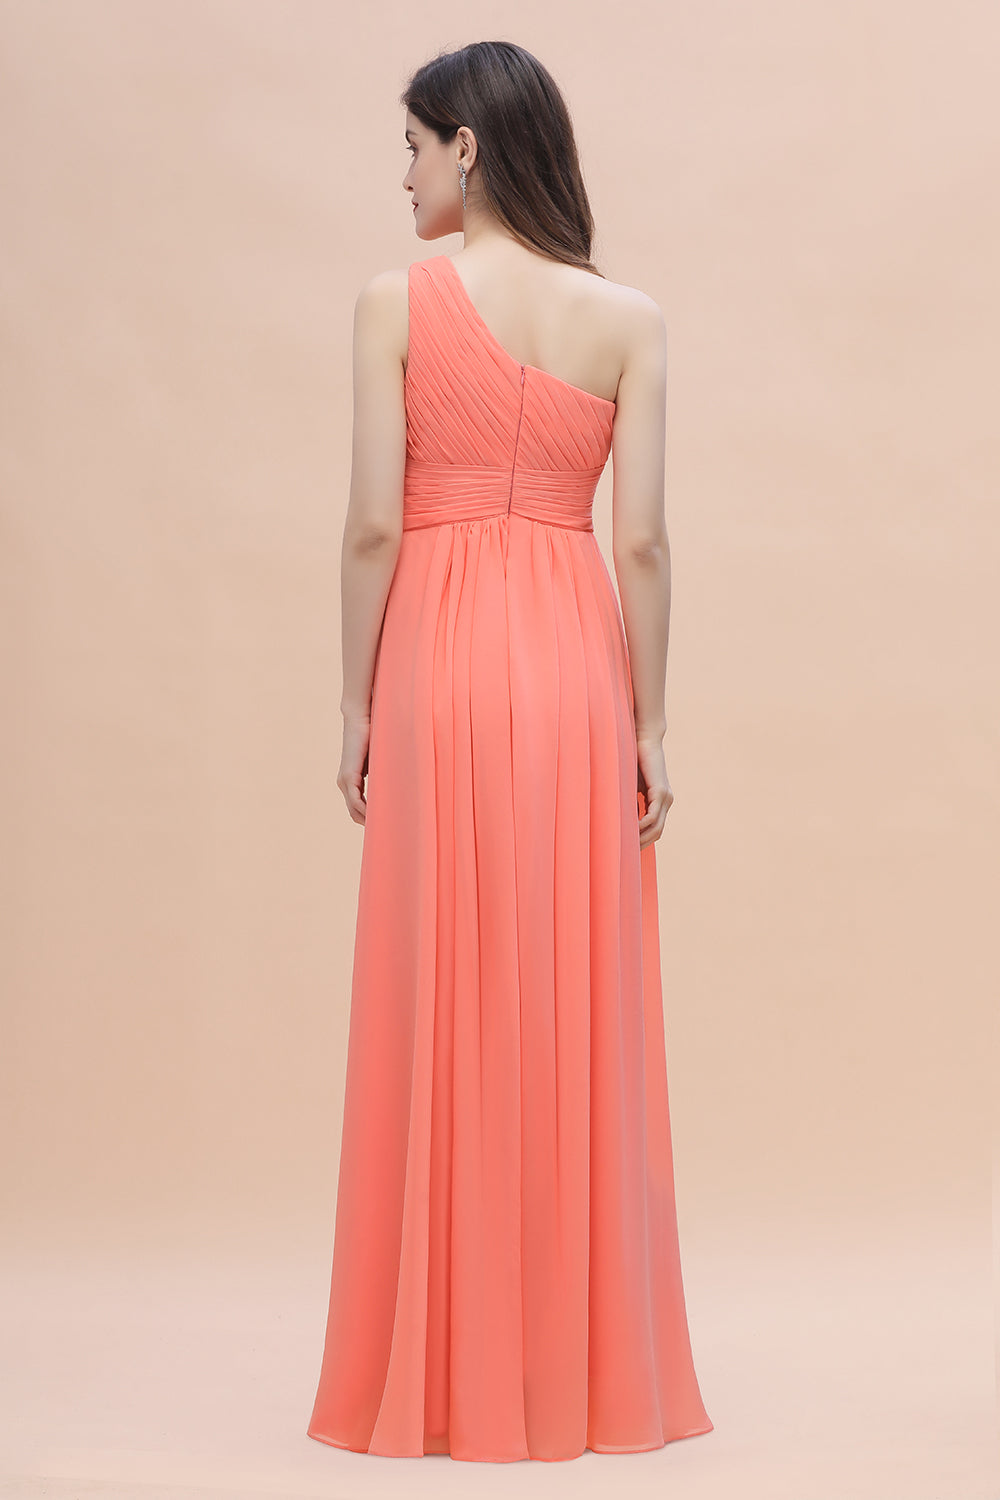 Chic One-Shoulder Ruffles Chiffon Coral Bridesmaid Dresses On Sale